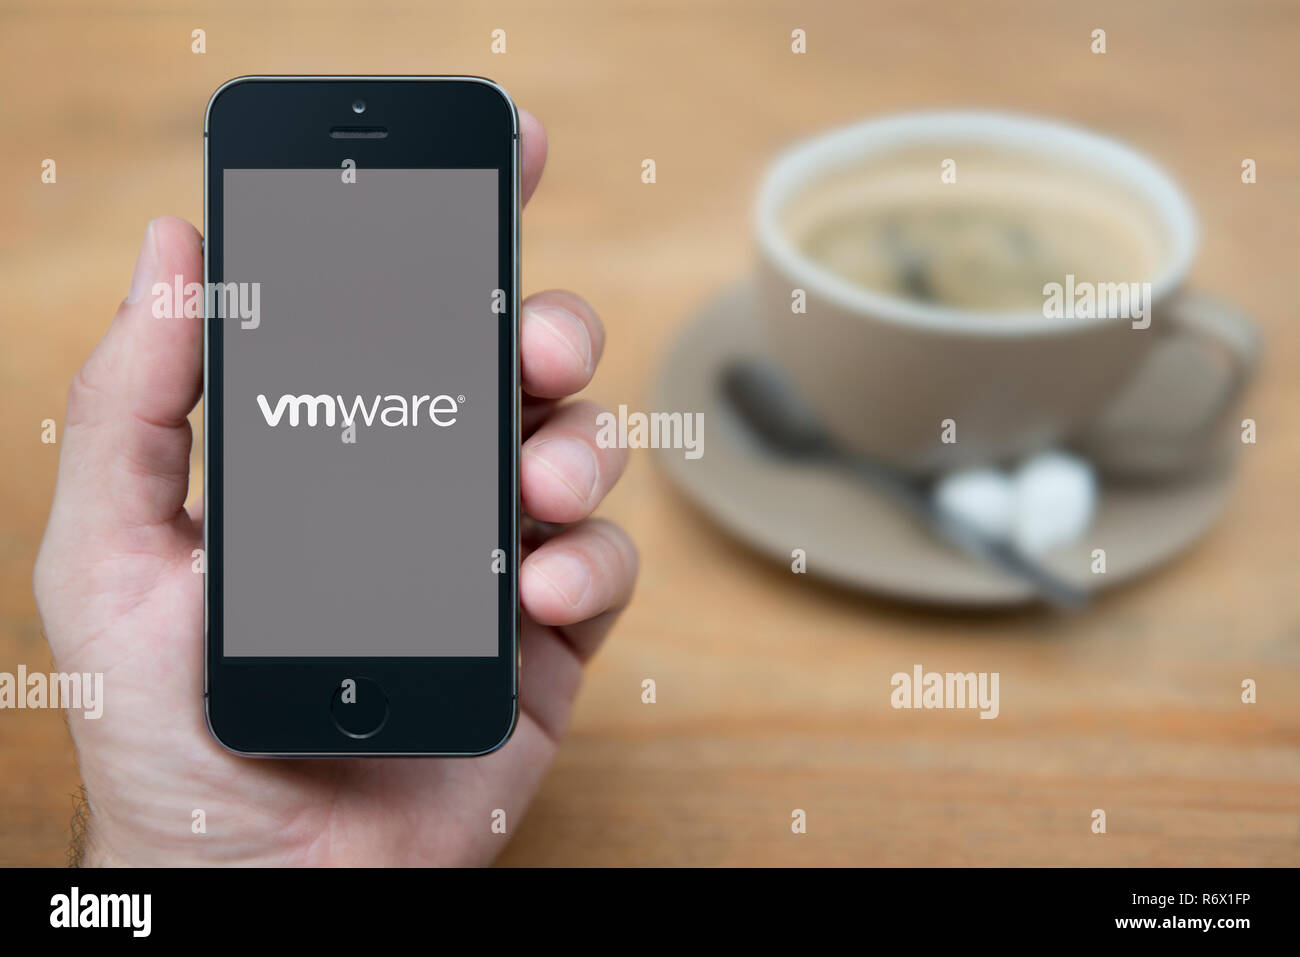 A man looks at his iPhone which displays the VM Ware logo (Editorial use only). Stock Photo